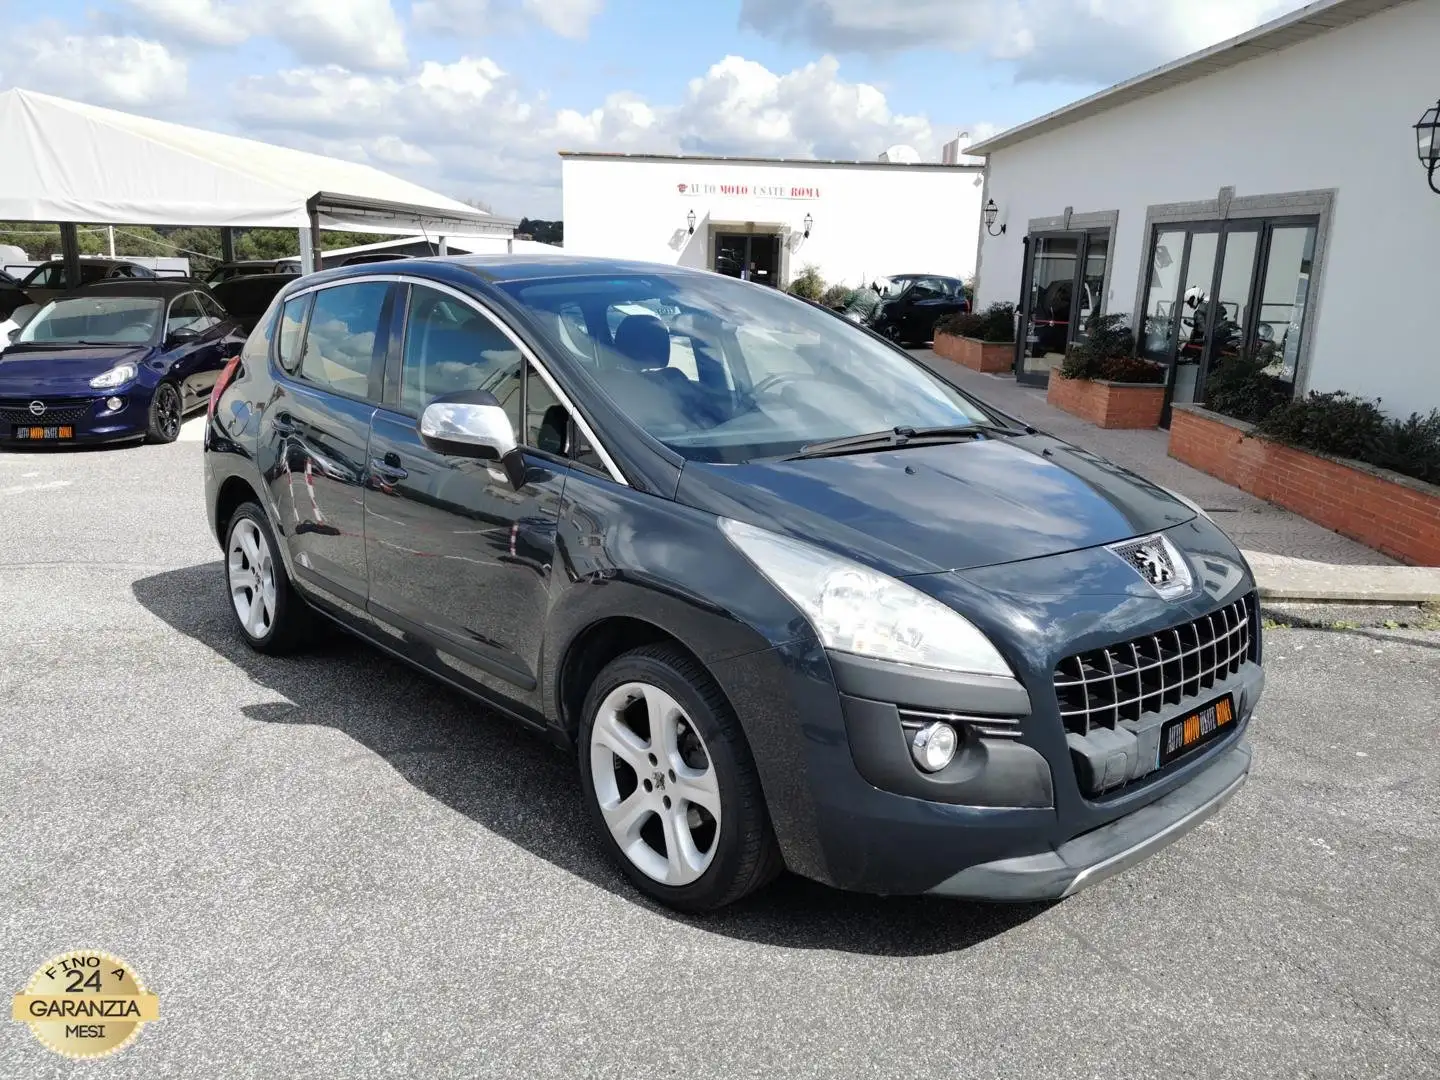 Peugeot 3008 1.6 HDi 110CV Outdoor - RATE AUTO MOTO SCOOTER Azul - 1